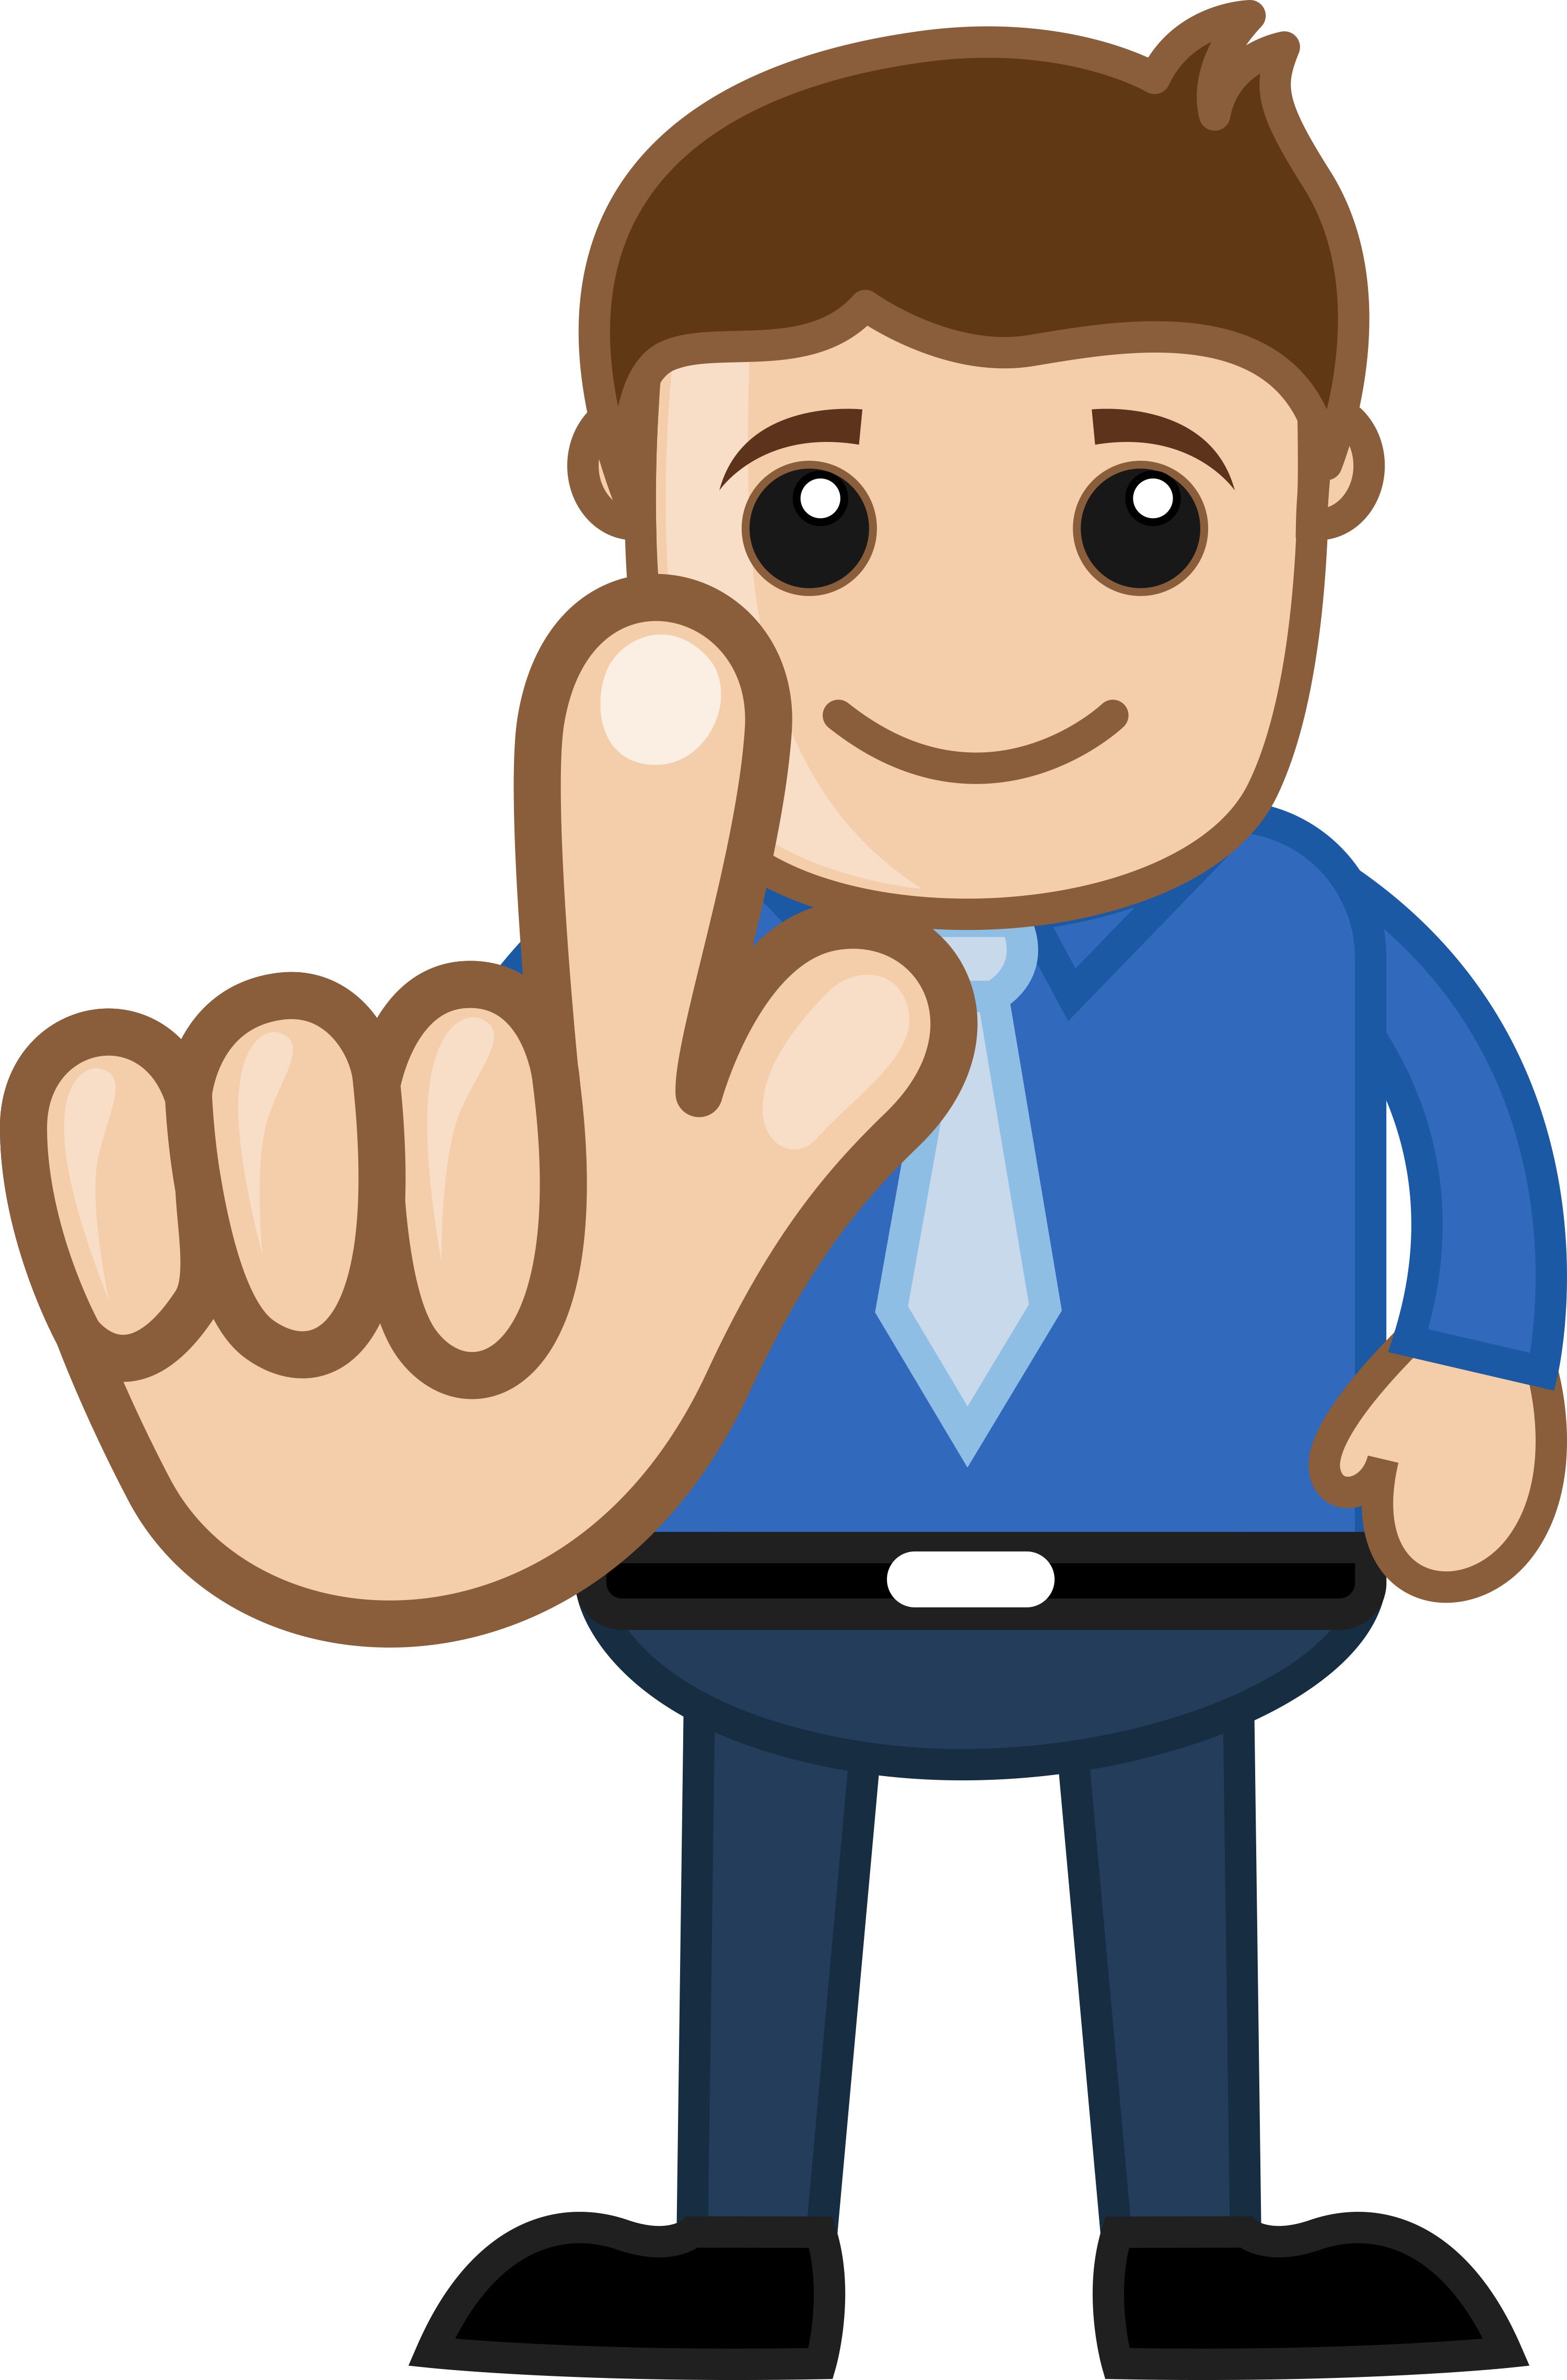 Manager clipart common man, Manager common man Transparent